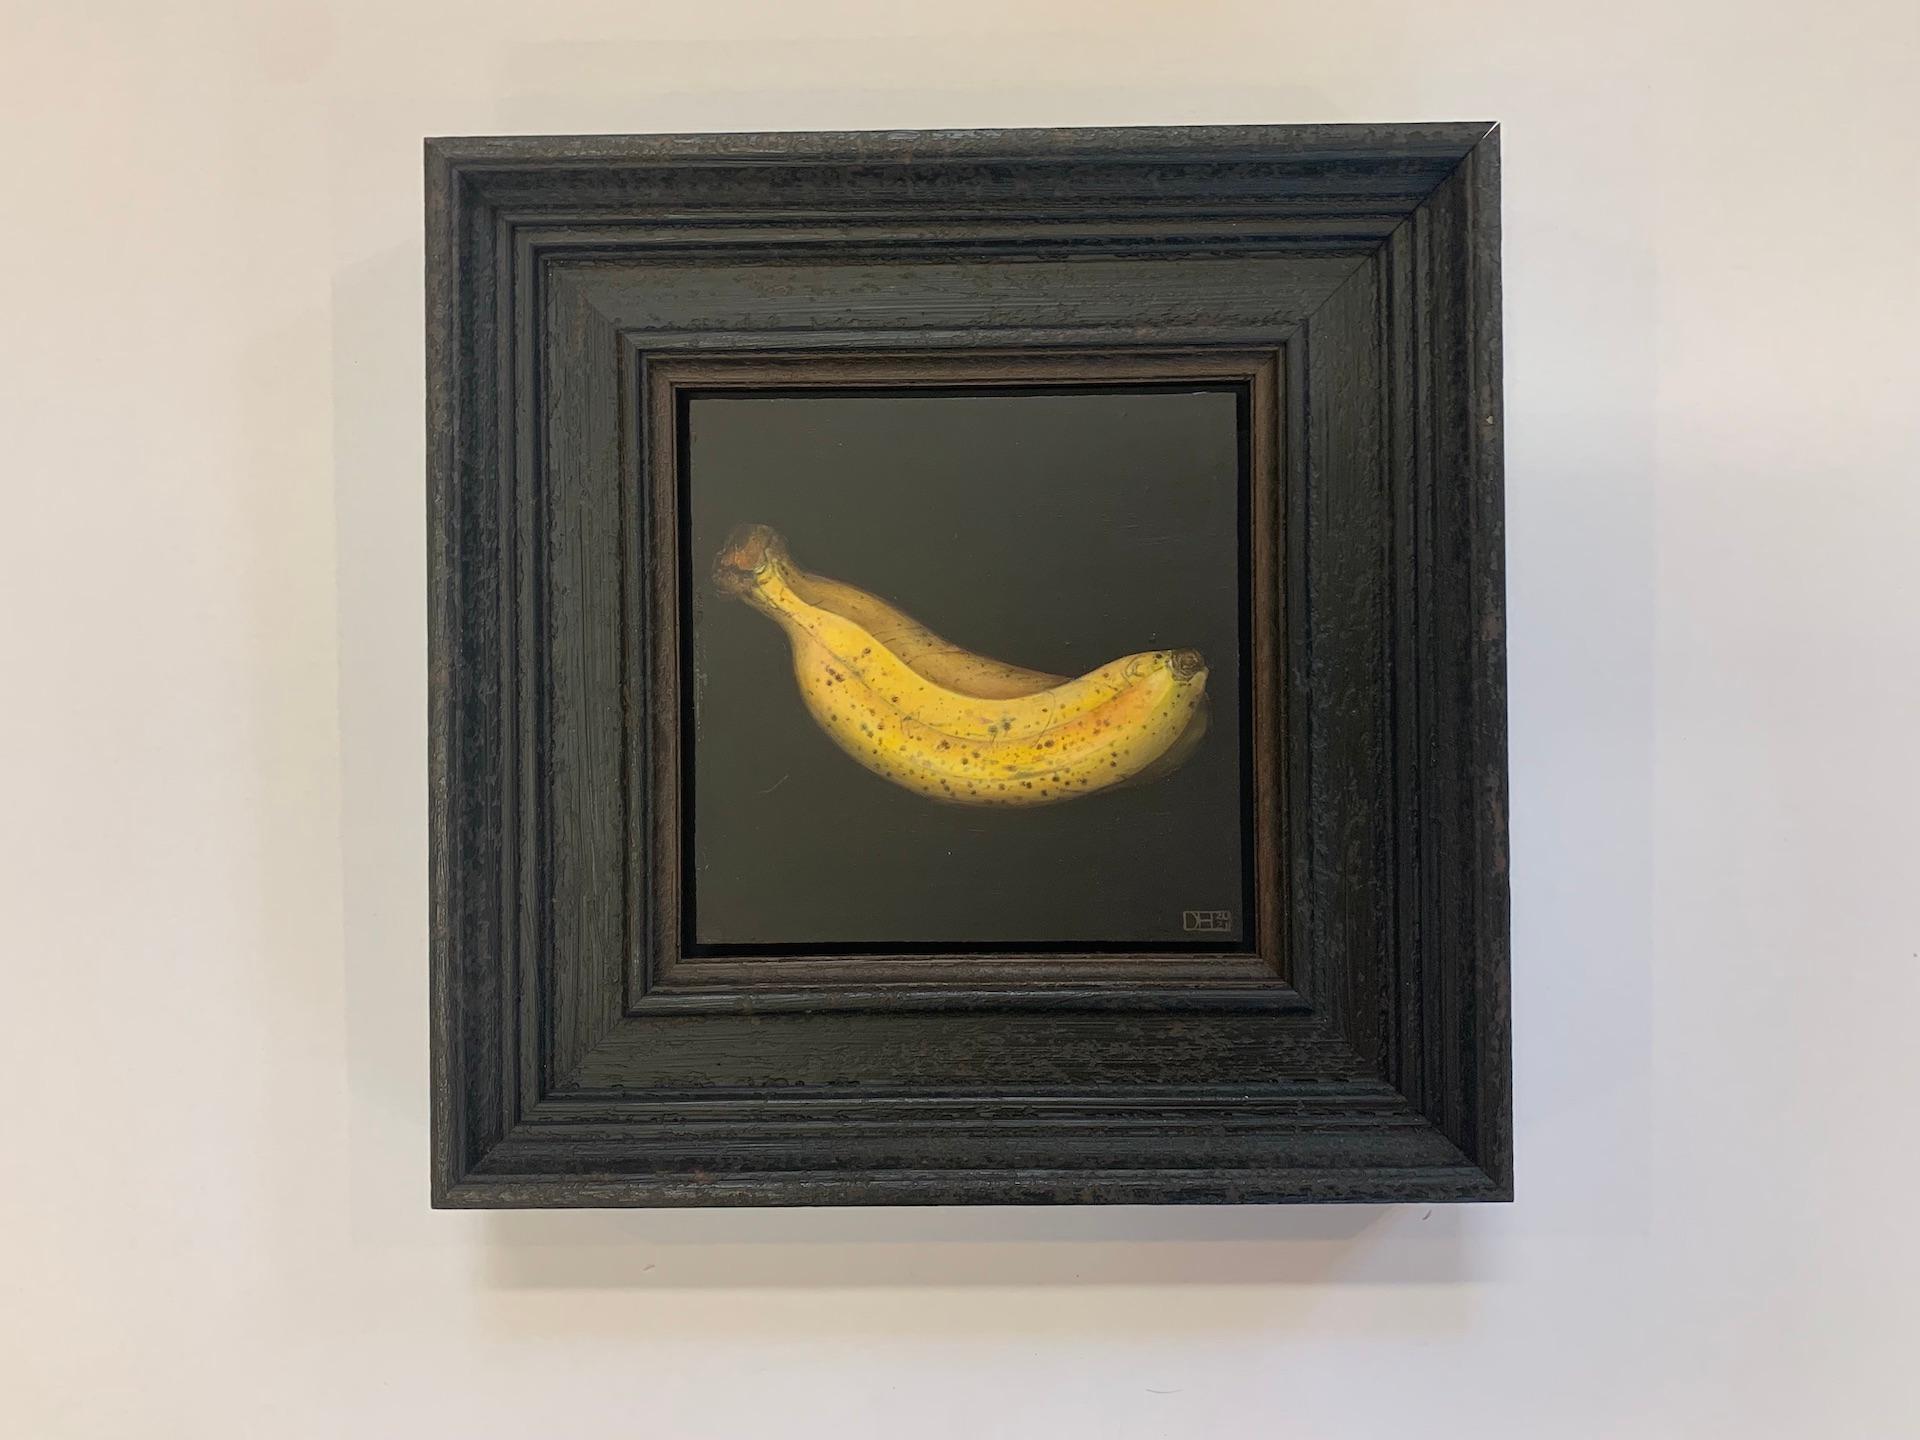 Deep Red Apple and Yellow Banana diptych - Realist Painting by Dani Humberstone